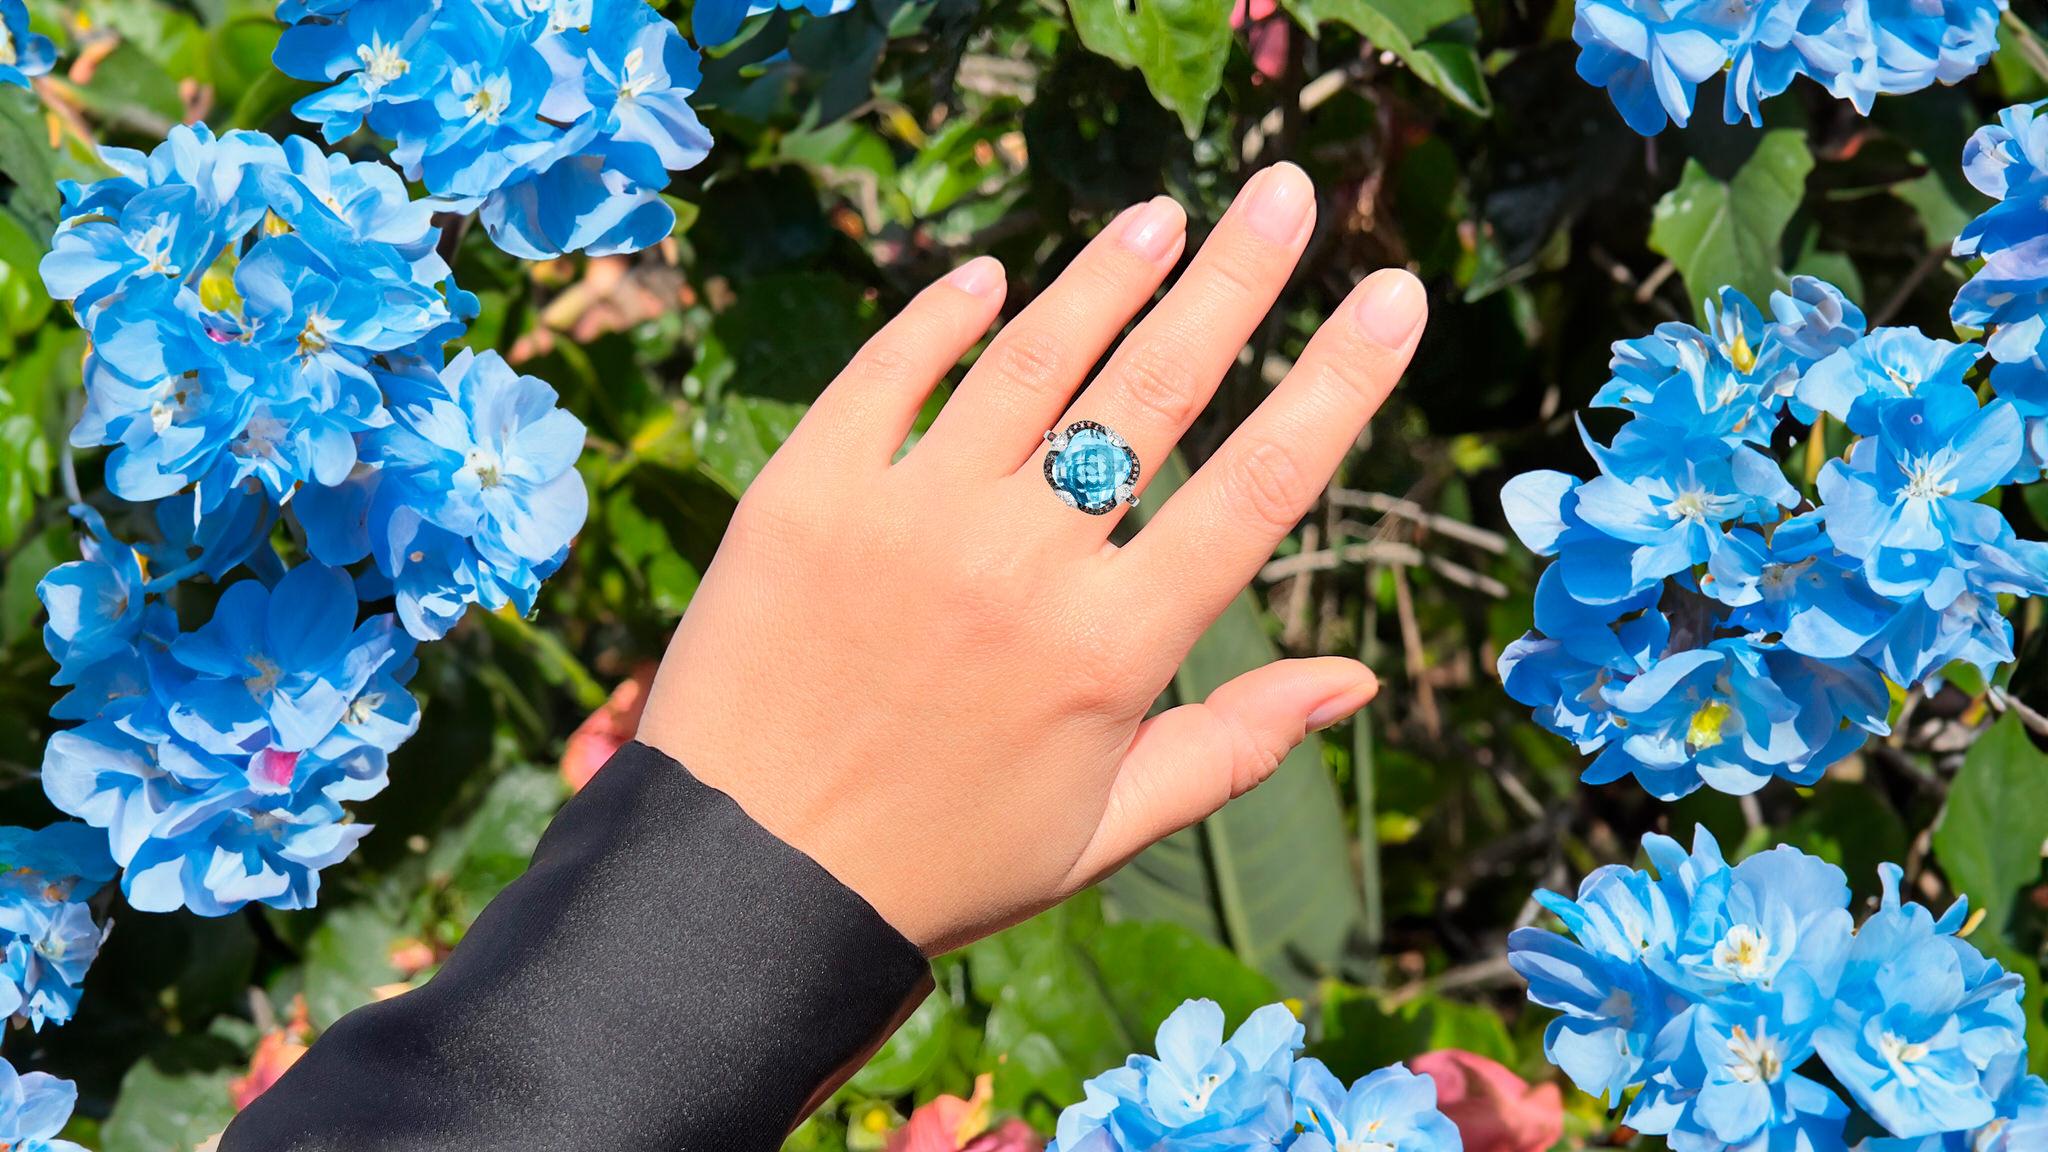 It comes with the Gemological Appraisal by GIA GG/AJP
All Gemstones are Natural
Swiss Blue Topaz = 8.15 Carats
22 Champagne Diamonds = 0.14 Carats
12 White Diamonds = 0.08 Carats
Metal: Rhodium Plated Sterling Silver
Ring Size: 7* US
*It can be